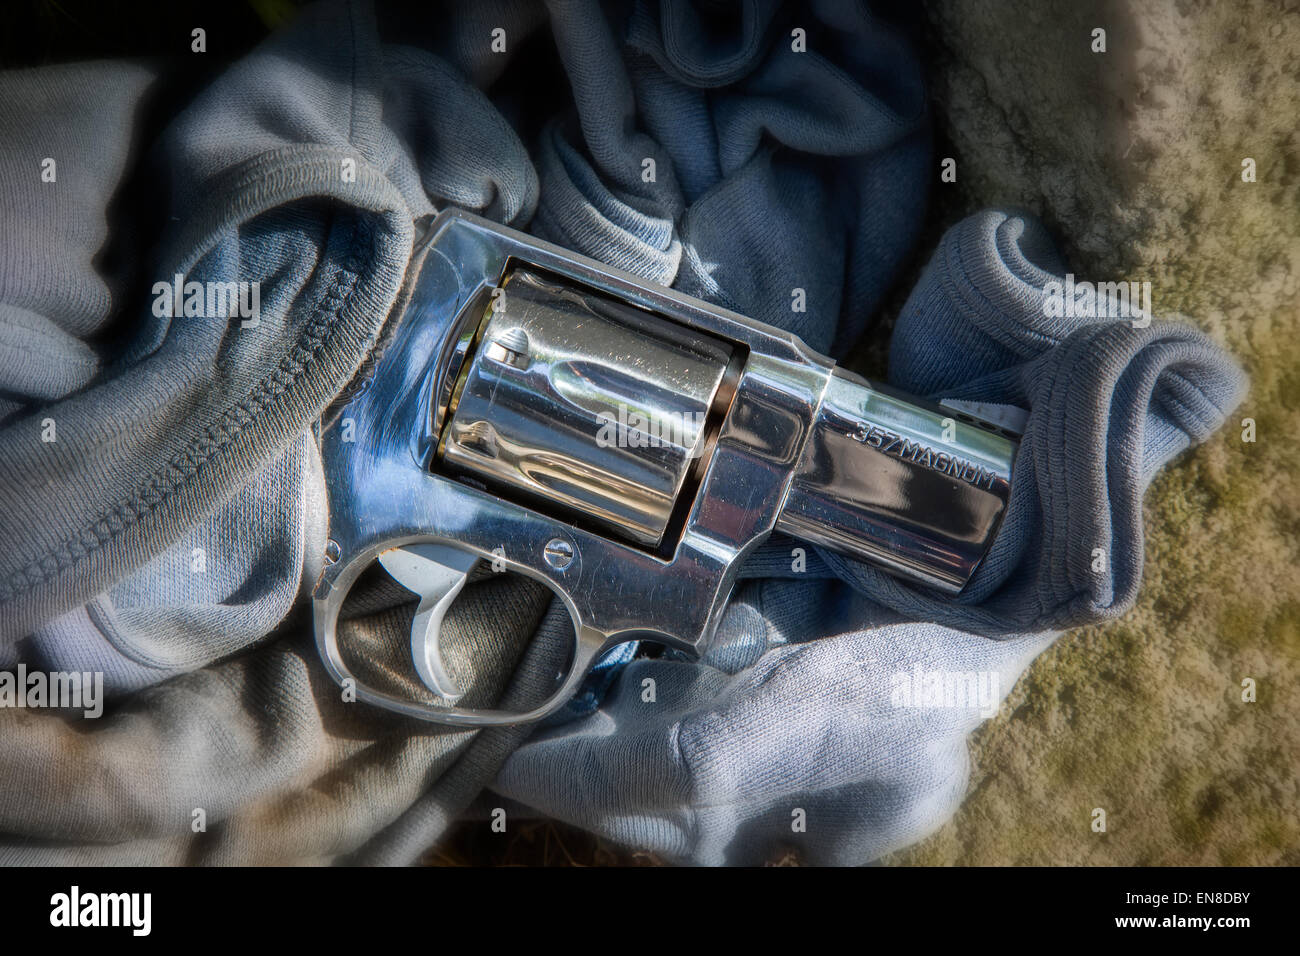 Revolver MAGNUM 357 as evidence of crime Stock Photo